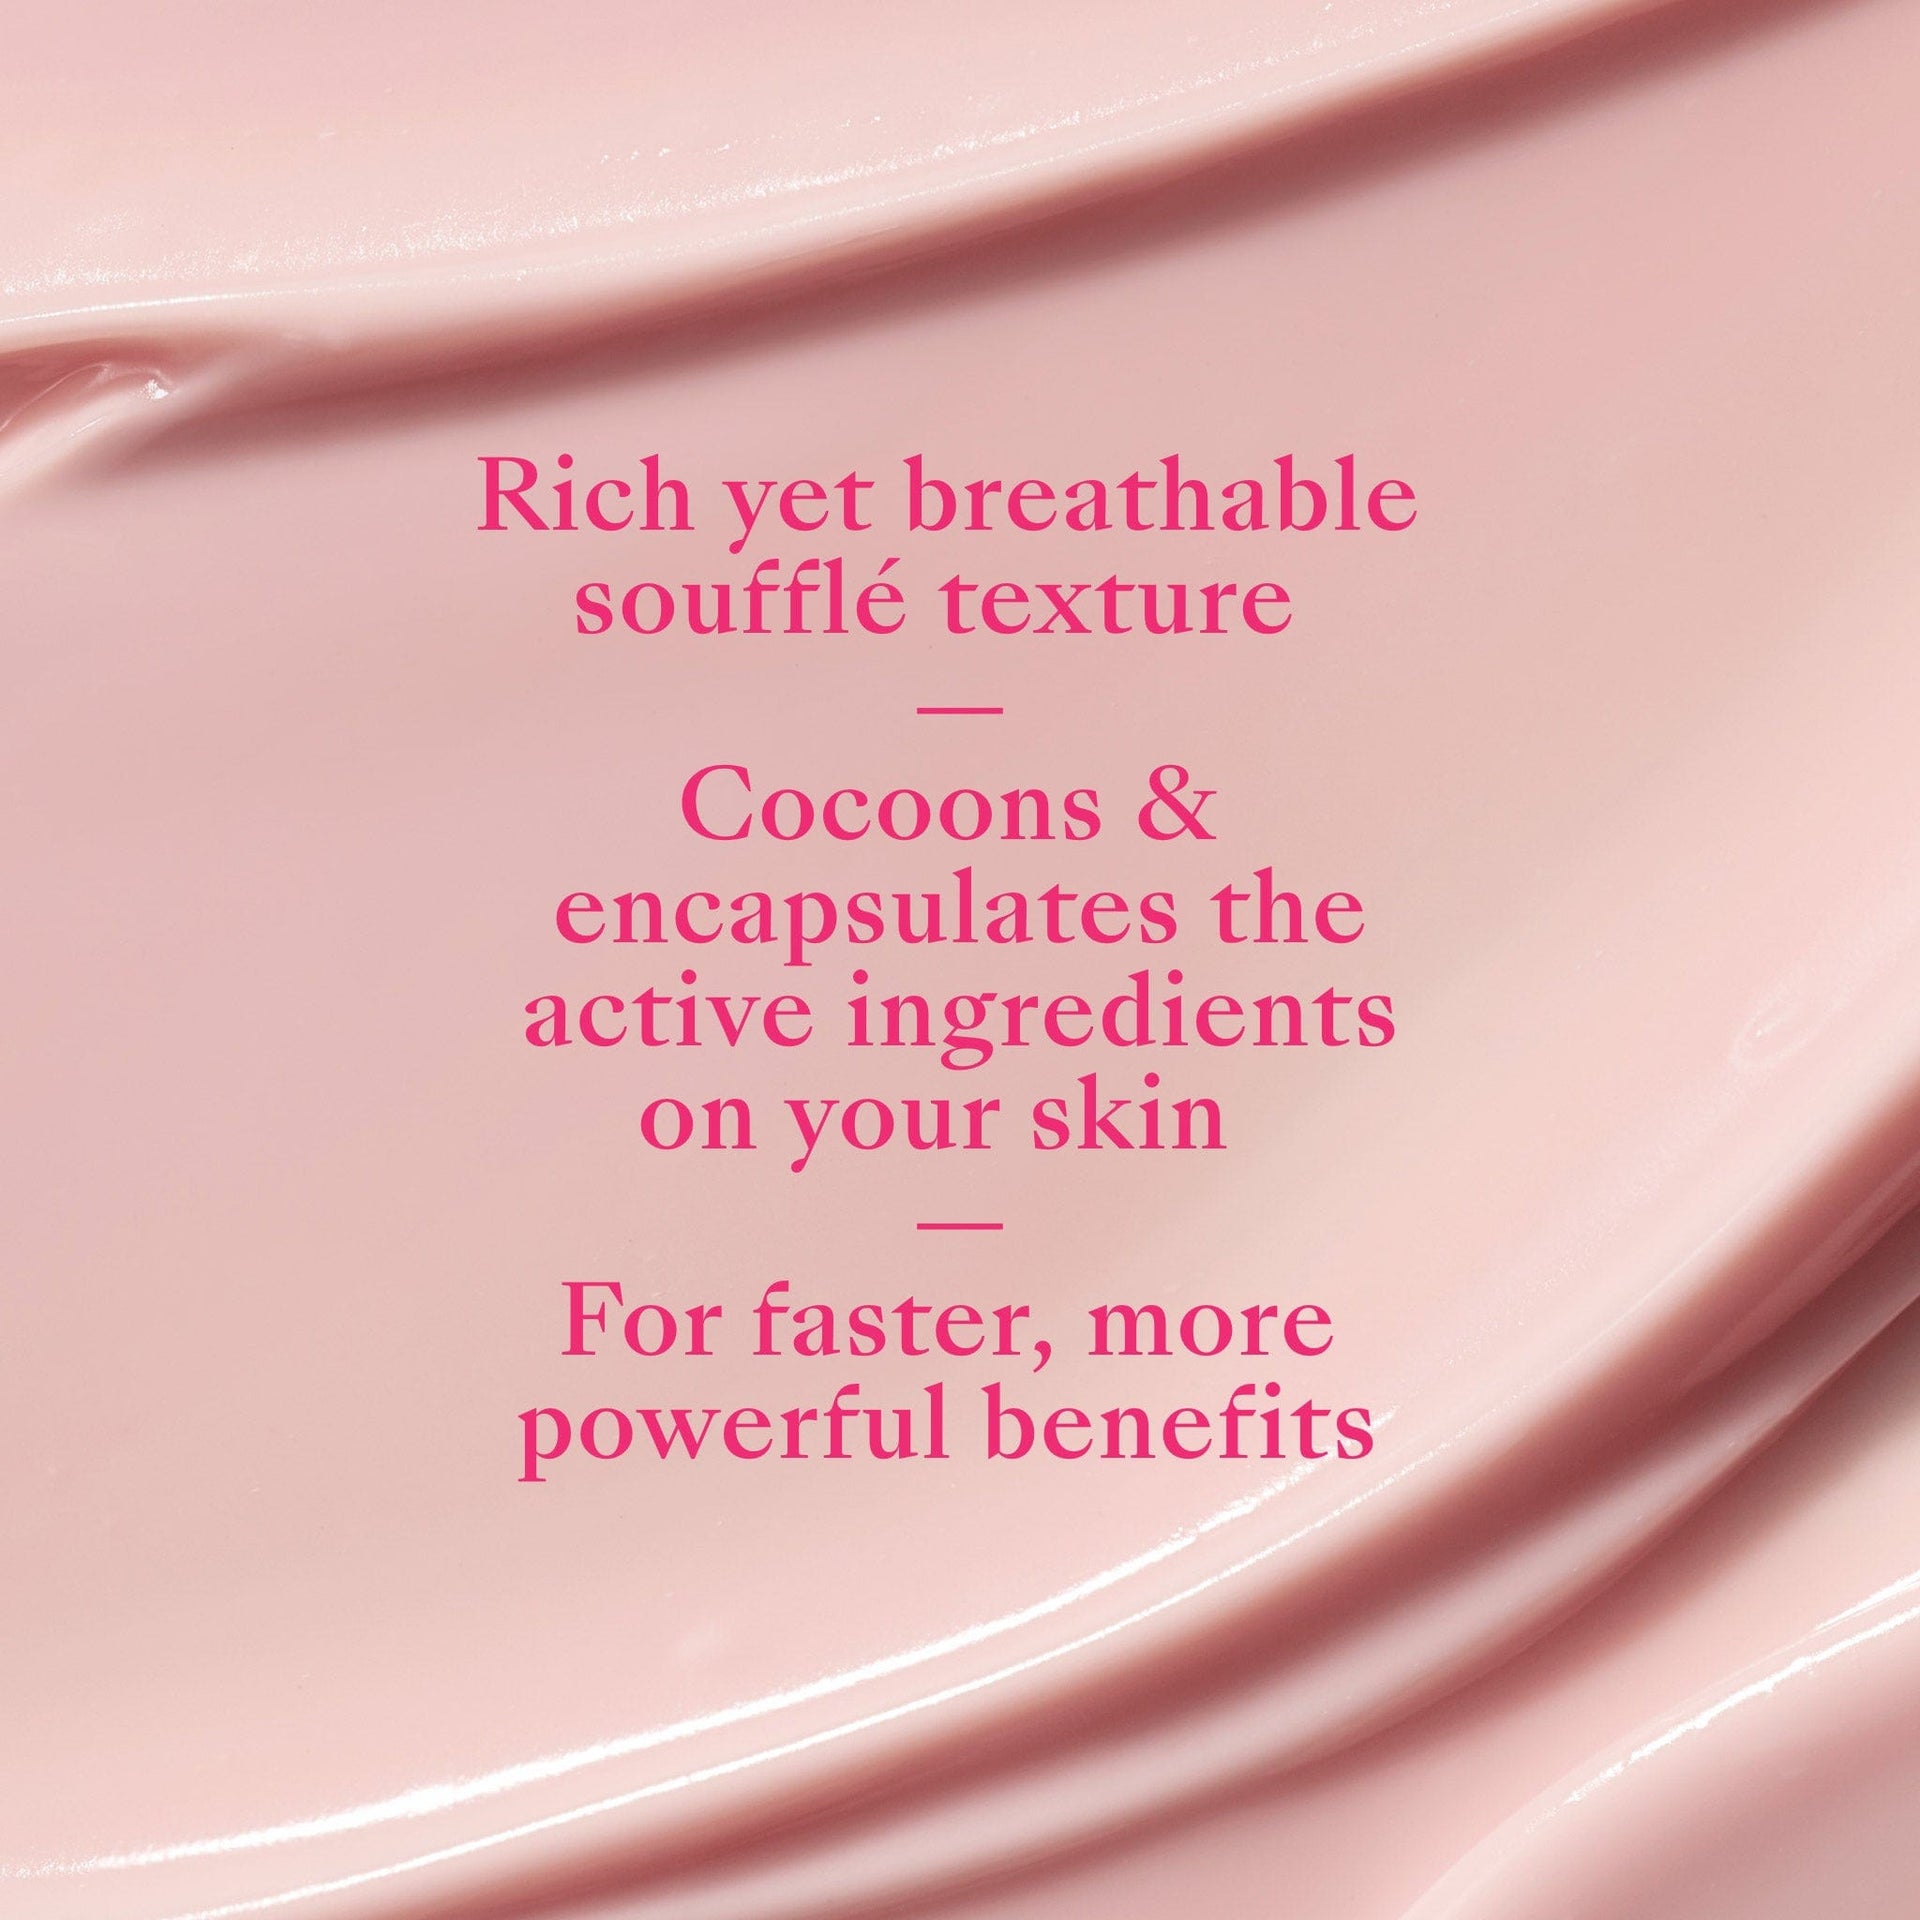 Rich yet breathable soufflé texture. Cocoons & encapsulates the active ingredients on your skin. Faster, more powerful benefits. 